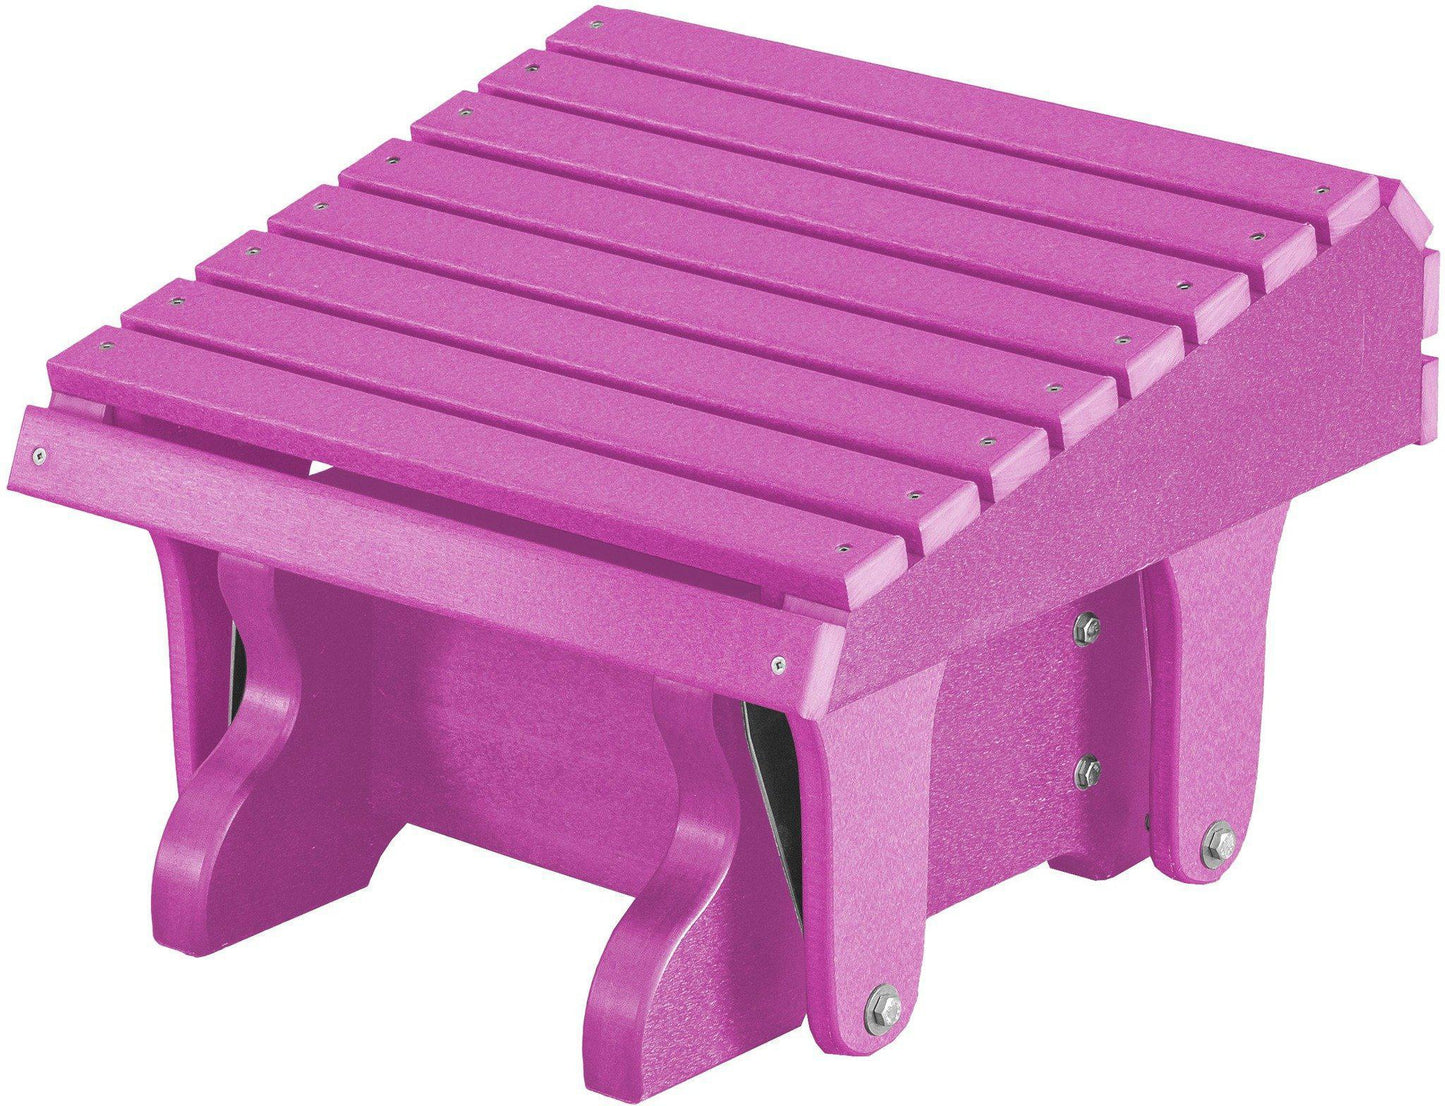 Wildridge Recycled Plastic Heritage Gliding Footrest (QUICK SHIP) - LEAD TIME TO SHIP 3 TO 4 BUSINESS DAYS